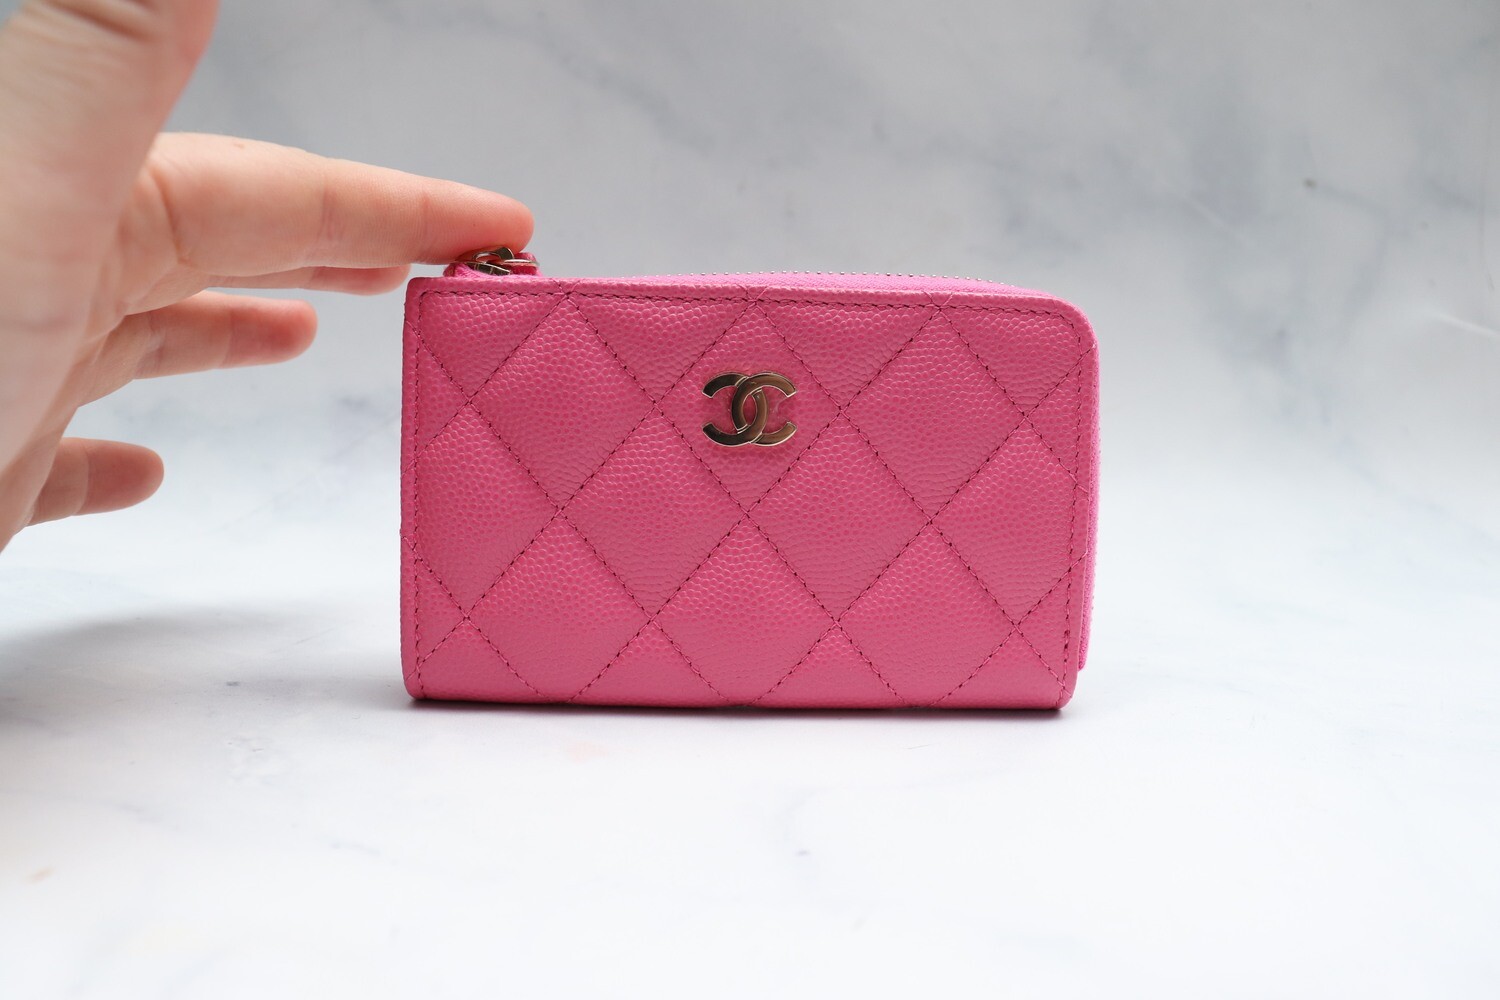 Chanel SLG Key Pouch, Pink Caviar Leather with Gold Hardware, New with Tags  and Card